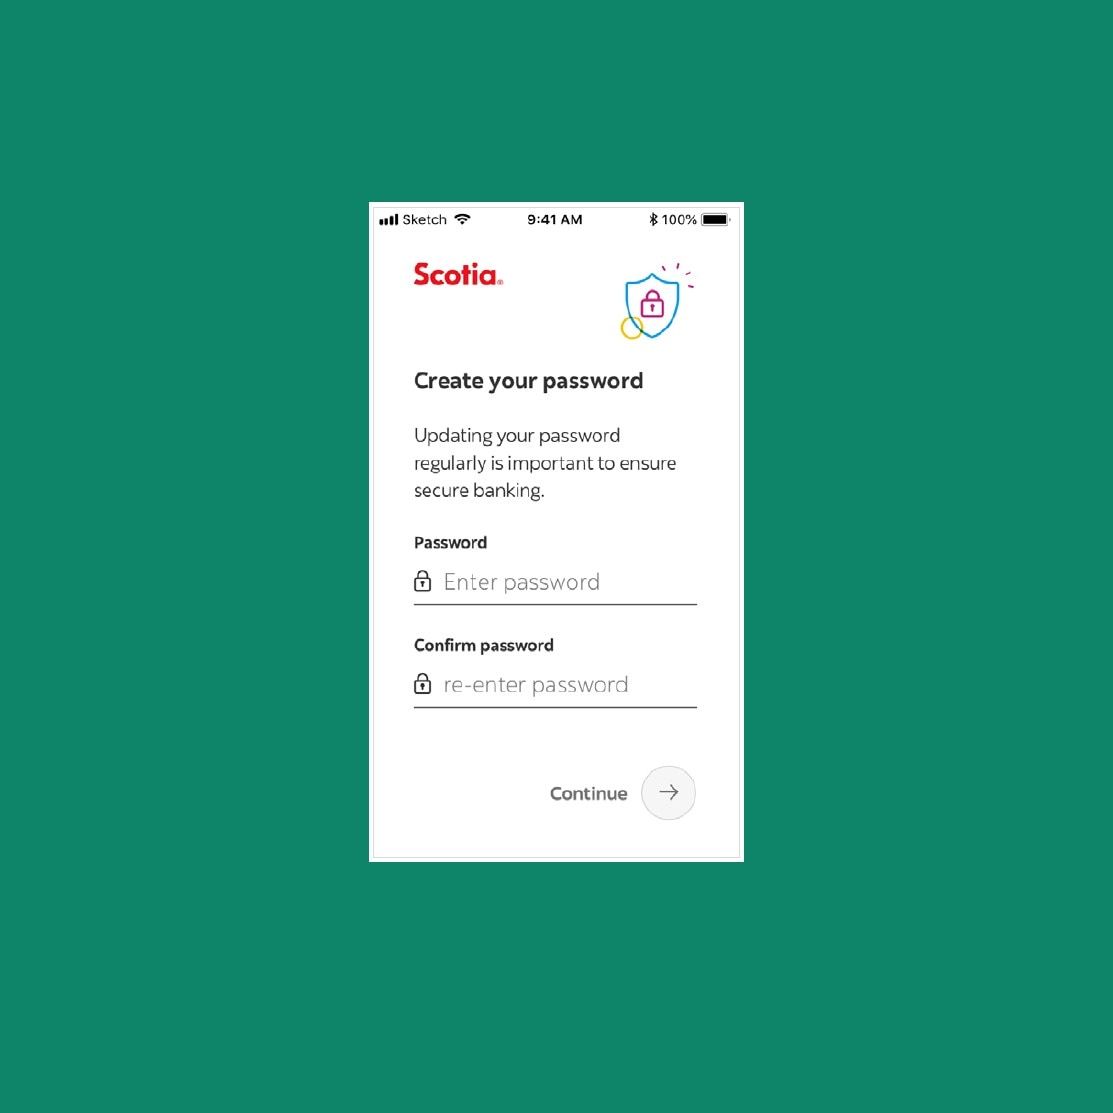 Create your password screen with Password, Confirm password fields and Continue button.